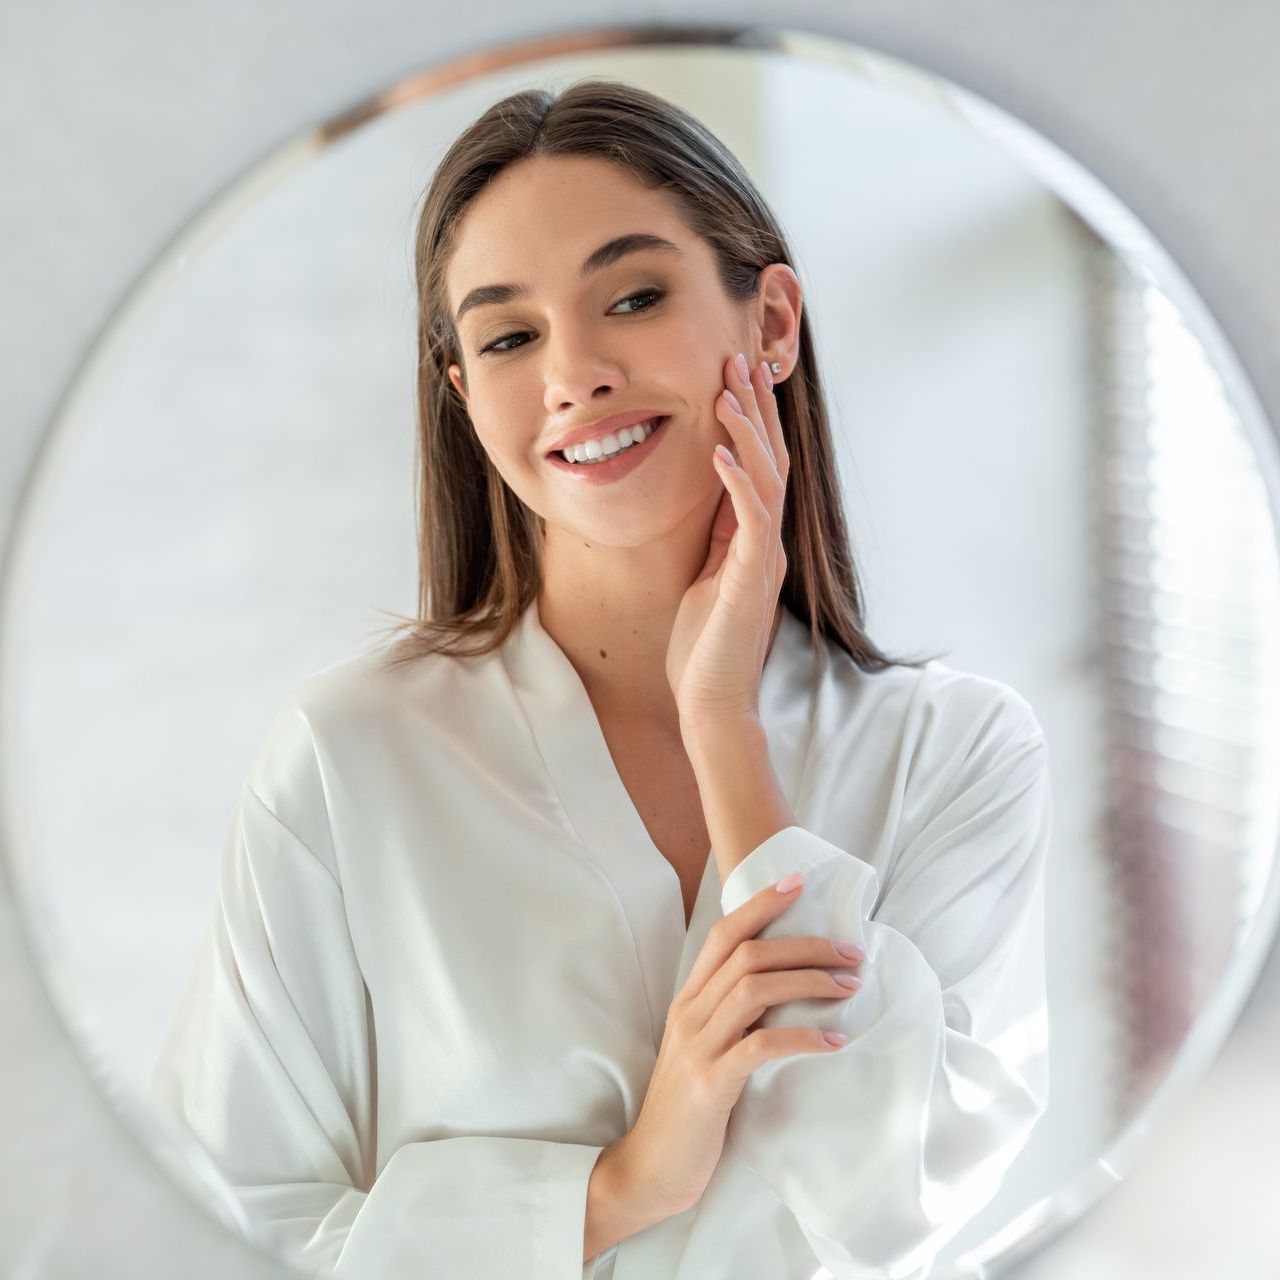 woman smiling in the mirror